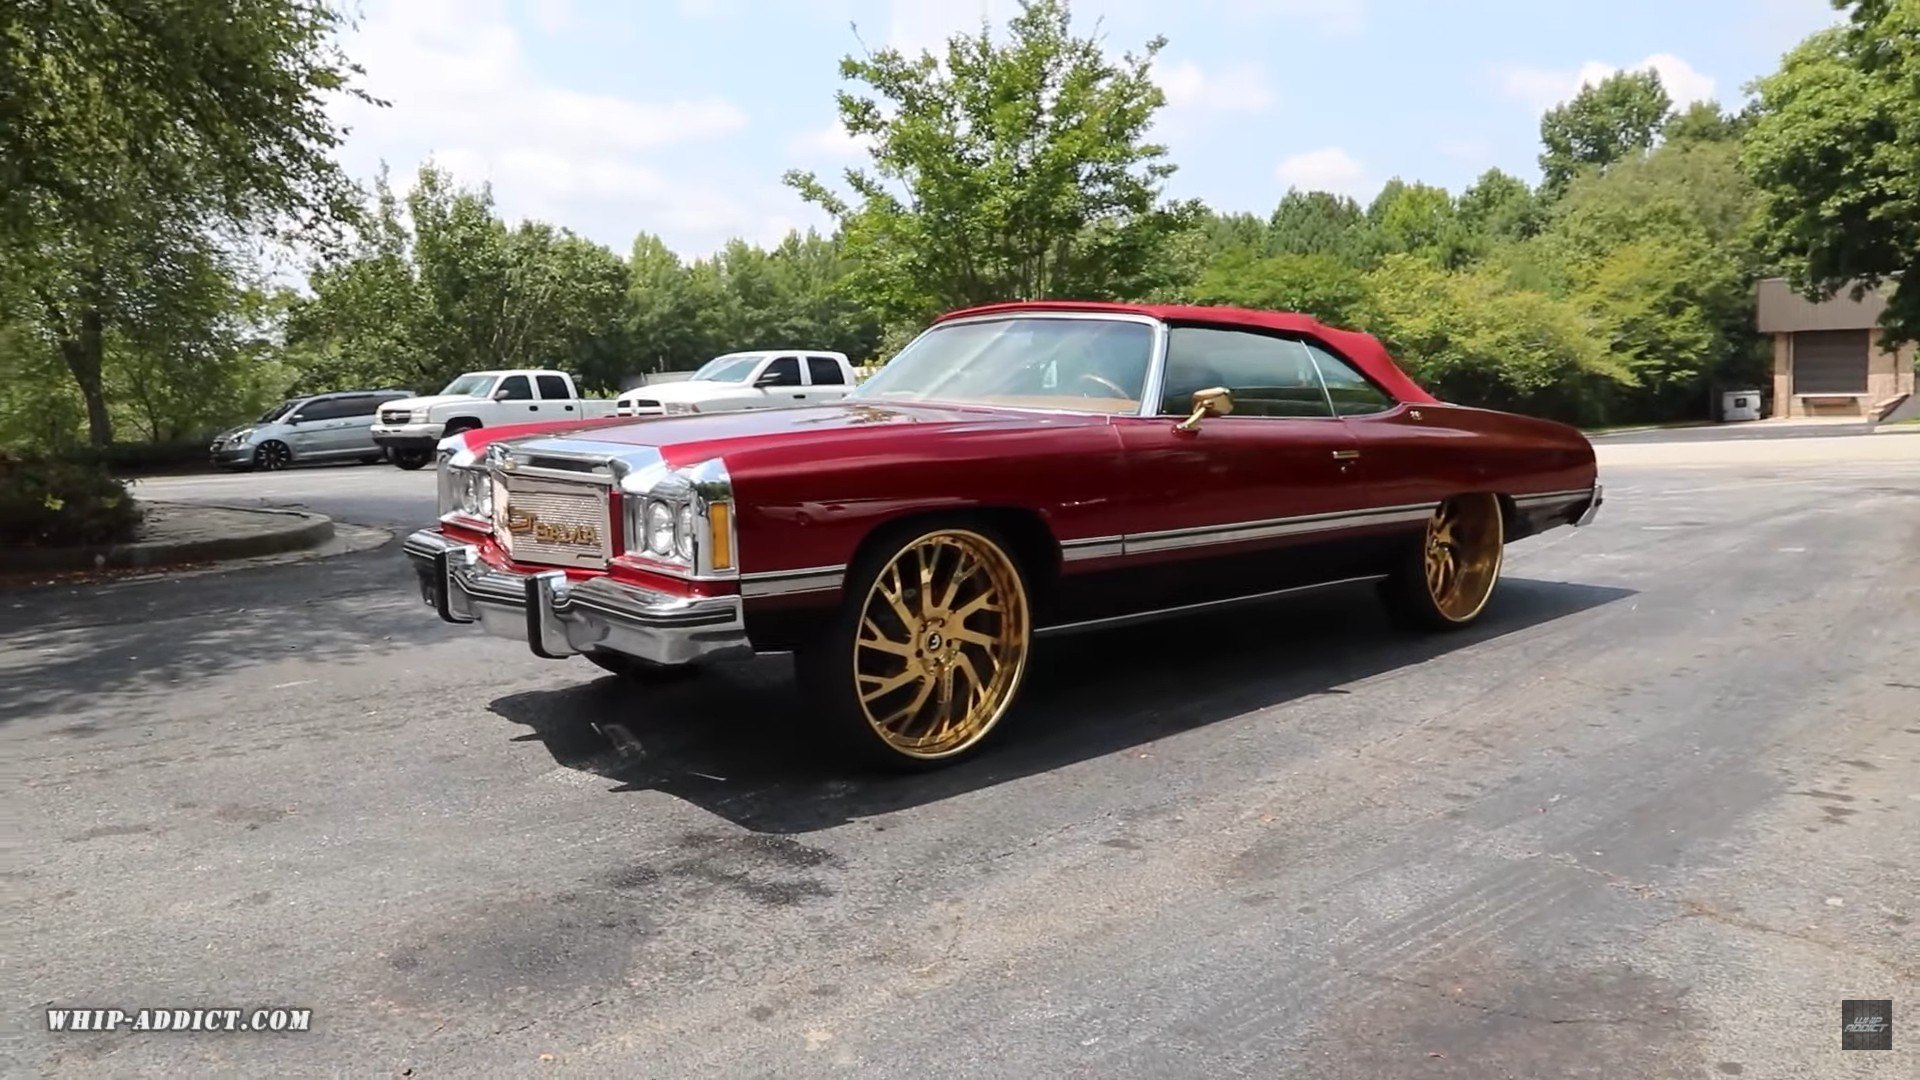 Brandywine 1974 Chevy Caprice Vert on Gold Needs Supercharged LT4 Pampering - autoevolution